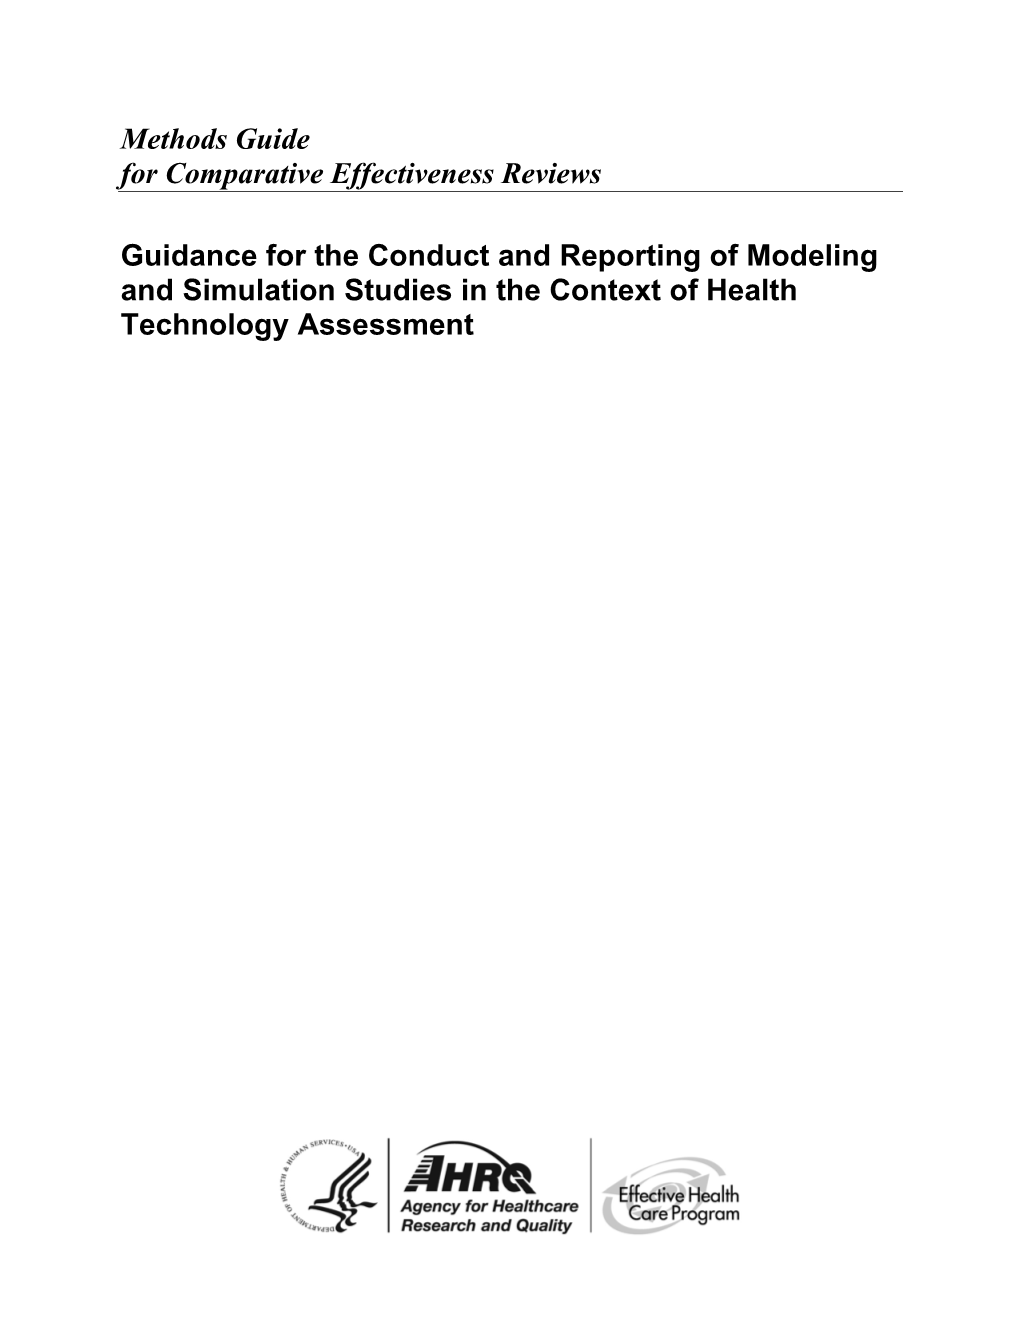 Guidance for the Conduct and Reporting of Modeling and Simulation Studies in the Context of Health Technology Assessment